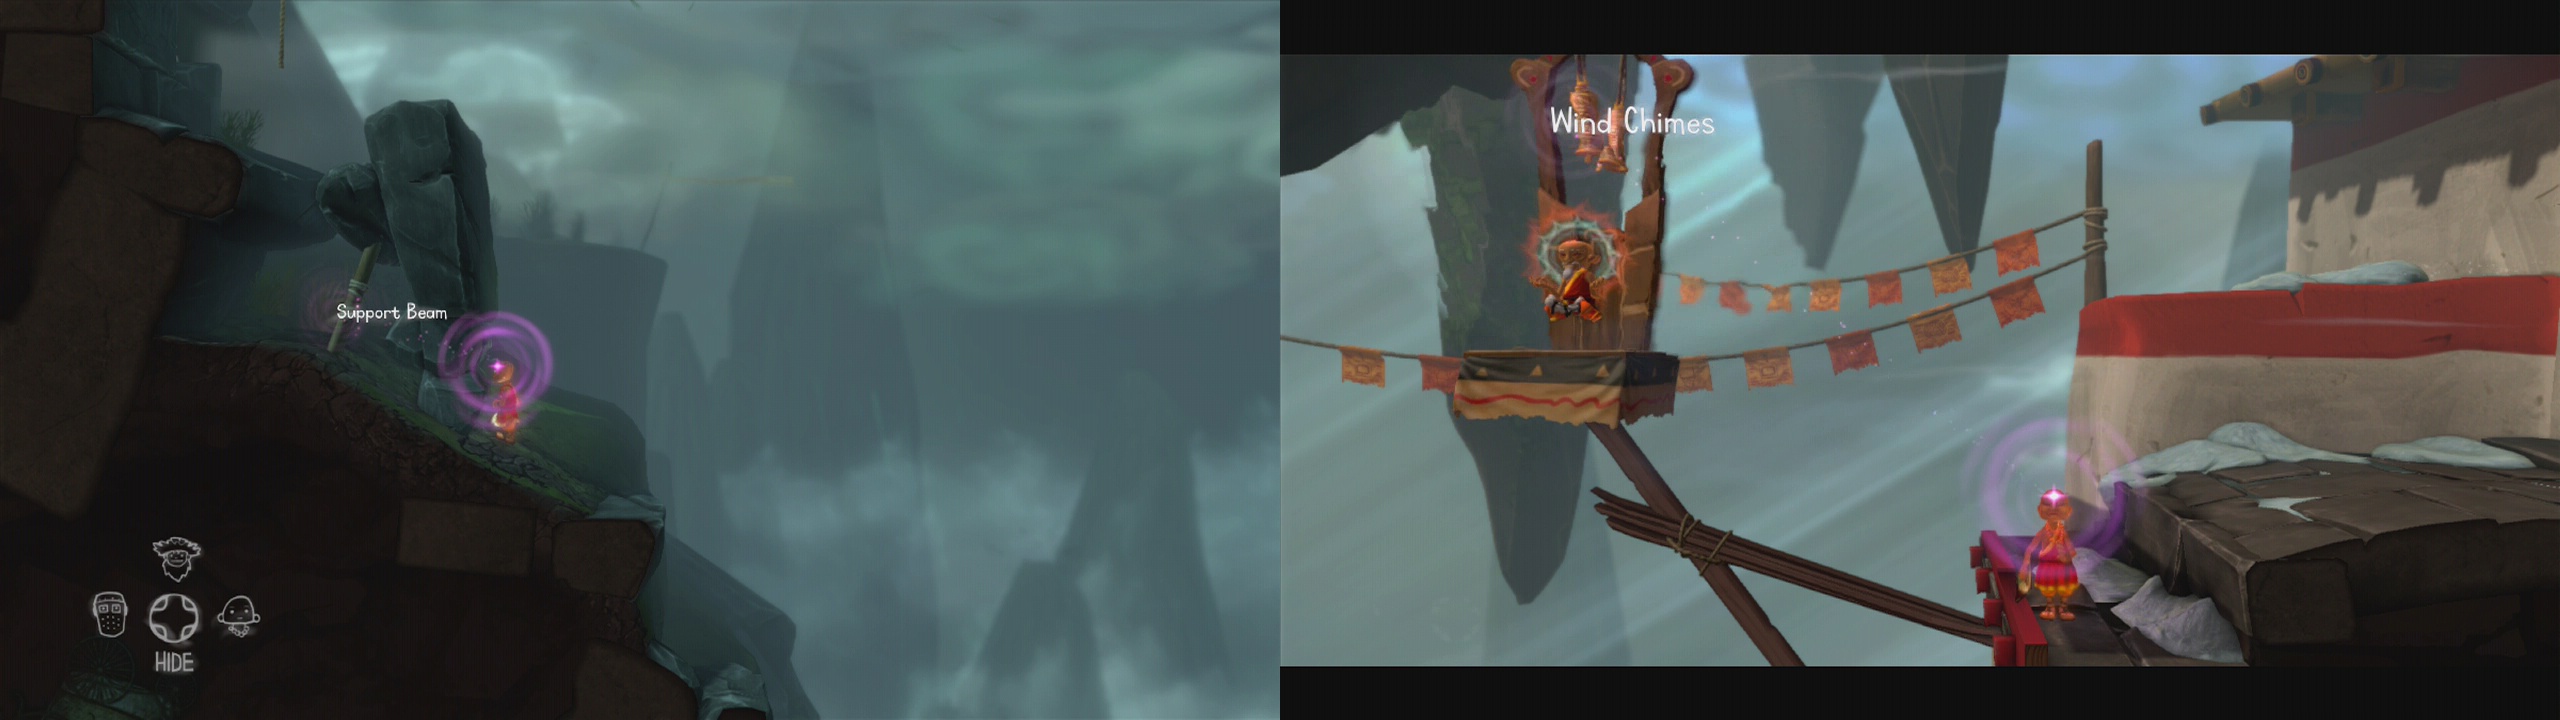 As you climb the mountain, use the monk’s special ability to remove the support (left) and to interact with the wind chimes at the top (right).